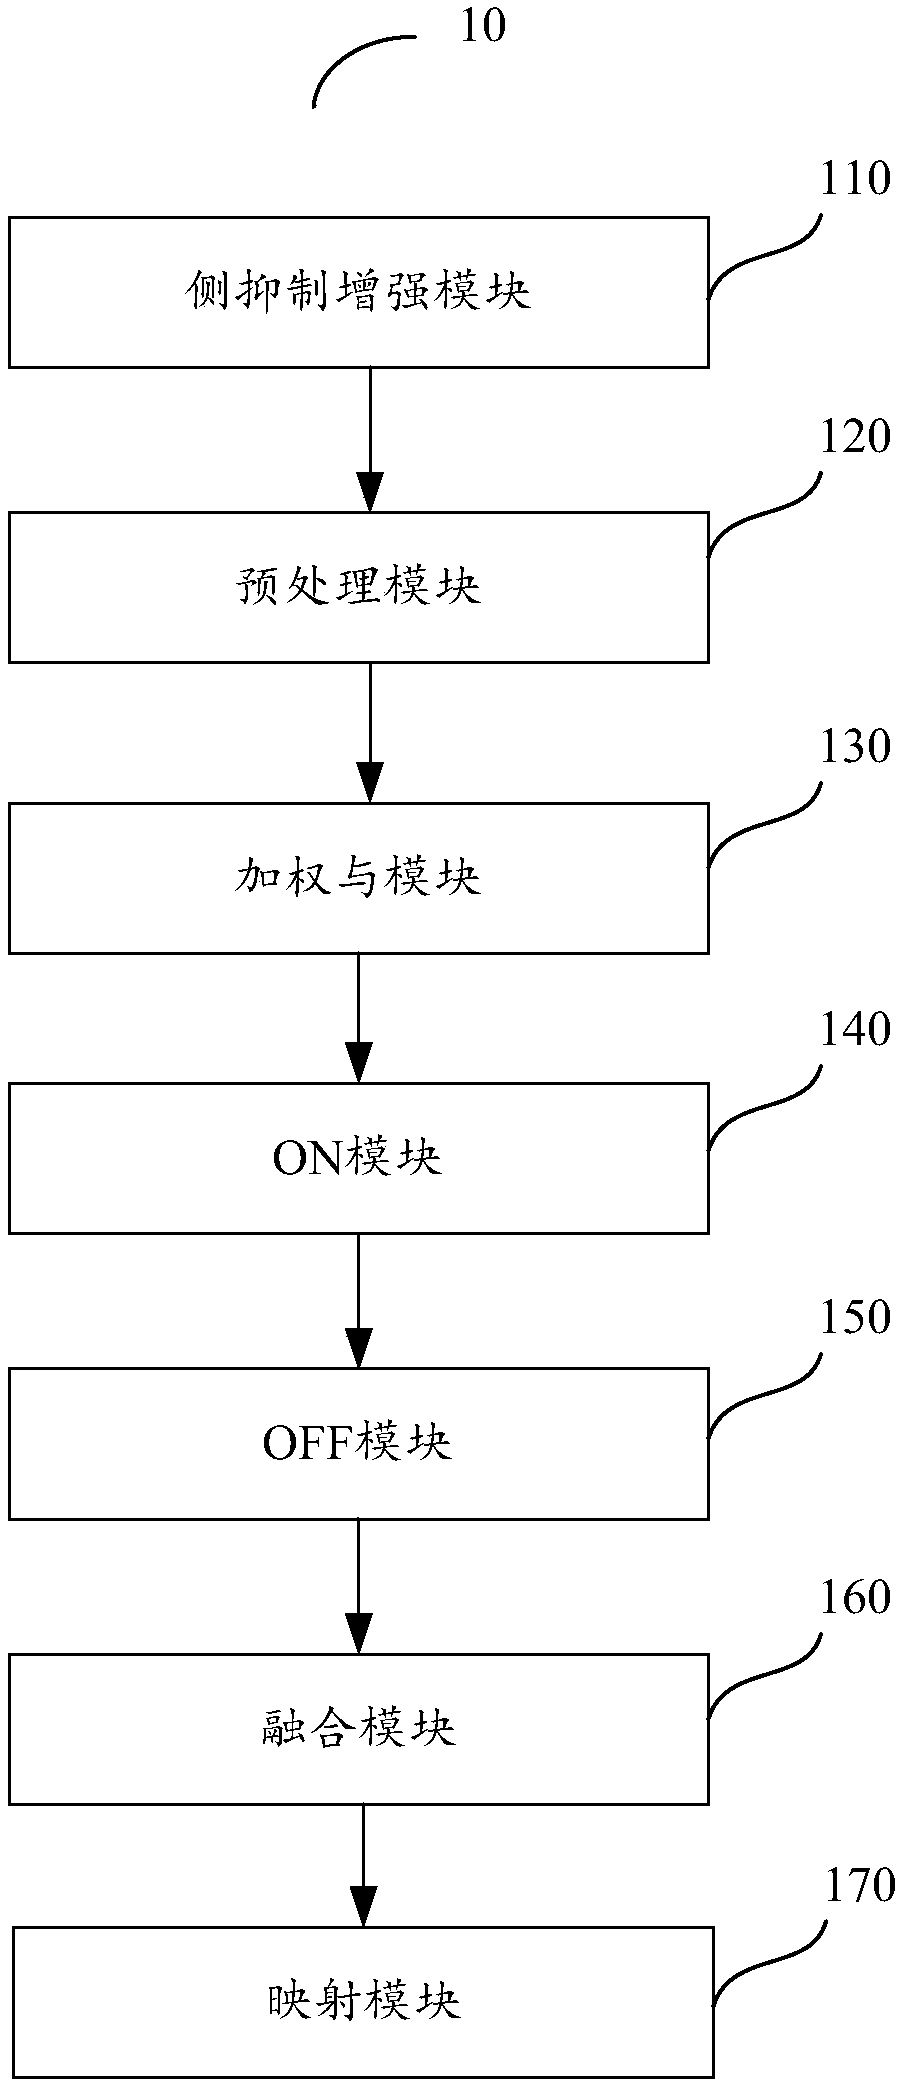 System and method of fusion of infrared-radiation (IR) image and low-light-level (LLL) color image